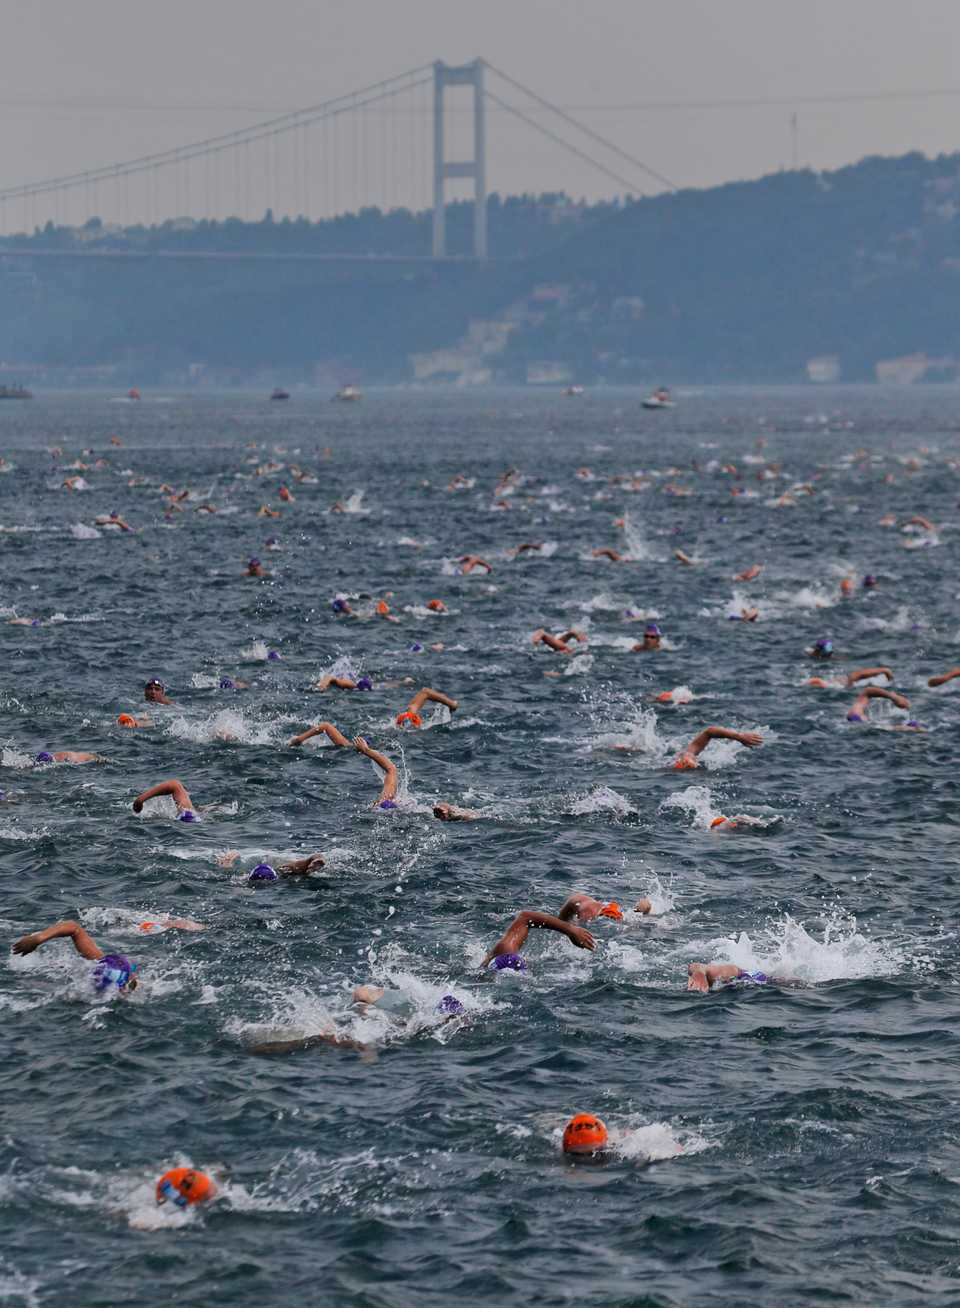 Athletes swim from Asia to Europe in the Bosphorus Strait during the Bosphorus Cross-Continental Swimming Race in Istanbul on July 22, 2018. Over 2,000 open-water competitors plunged into the water from a ferry docked on the city's Asian side and swam for about 6.5 km in the cross-continental event.